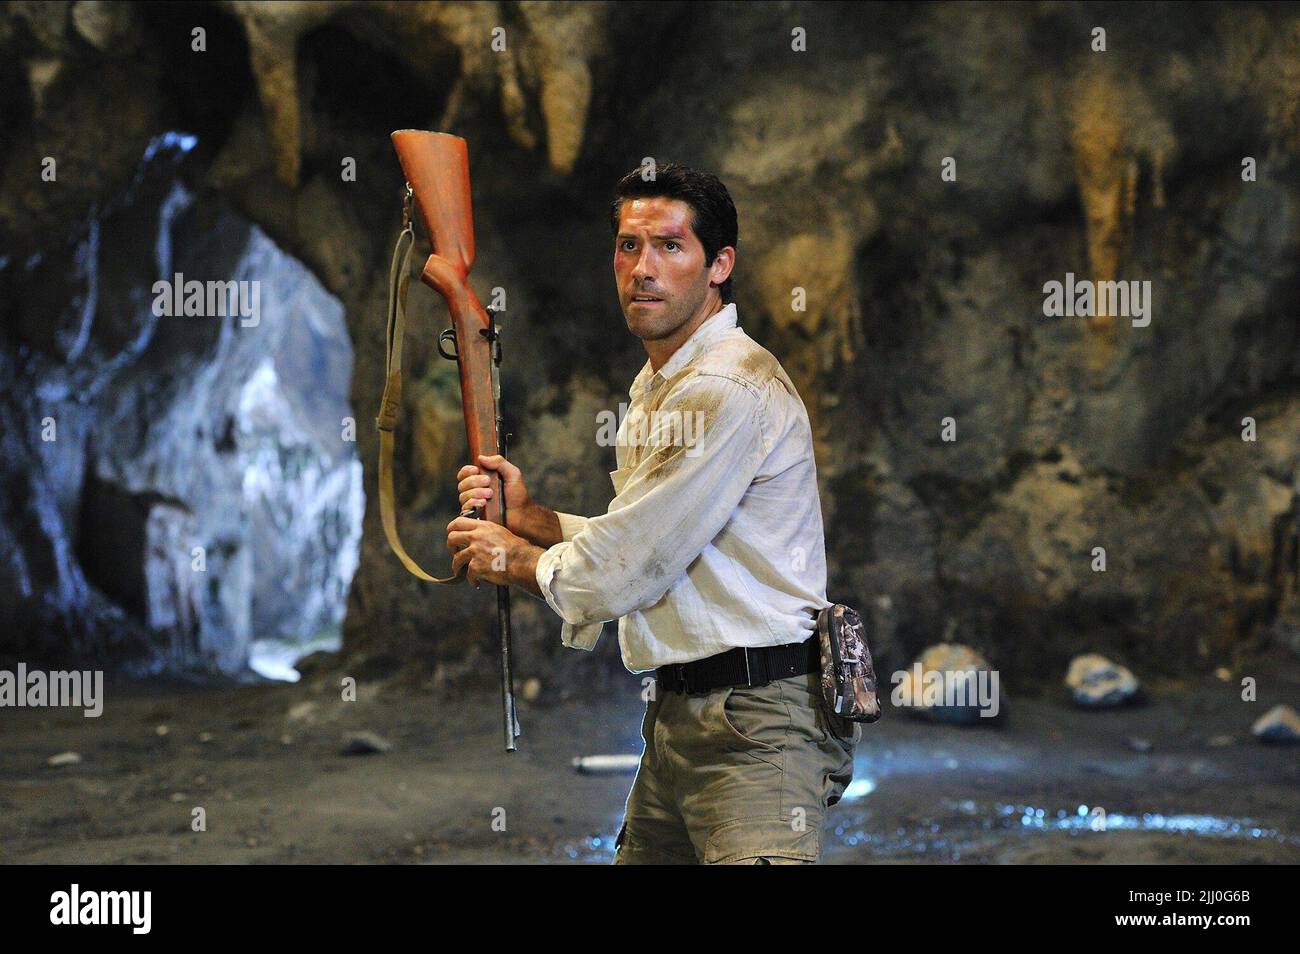 Scott adkins hi-res stock photography and images picture